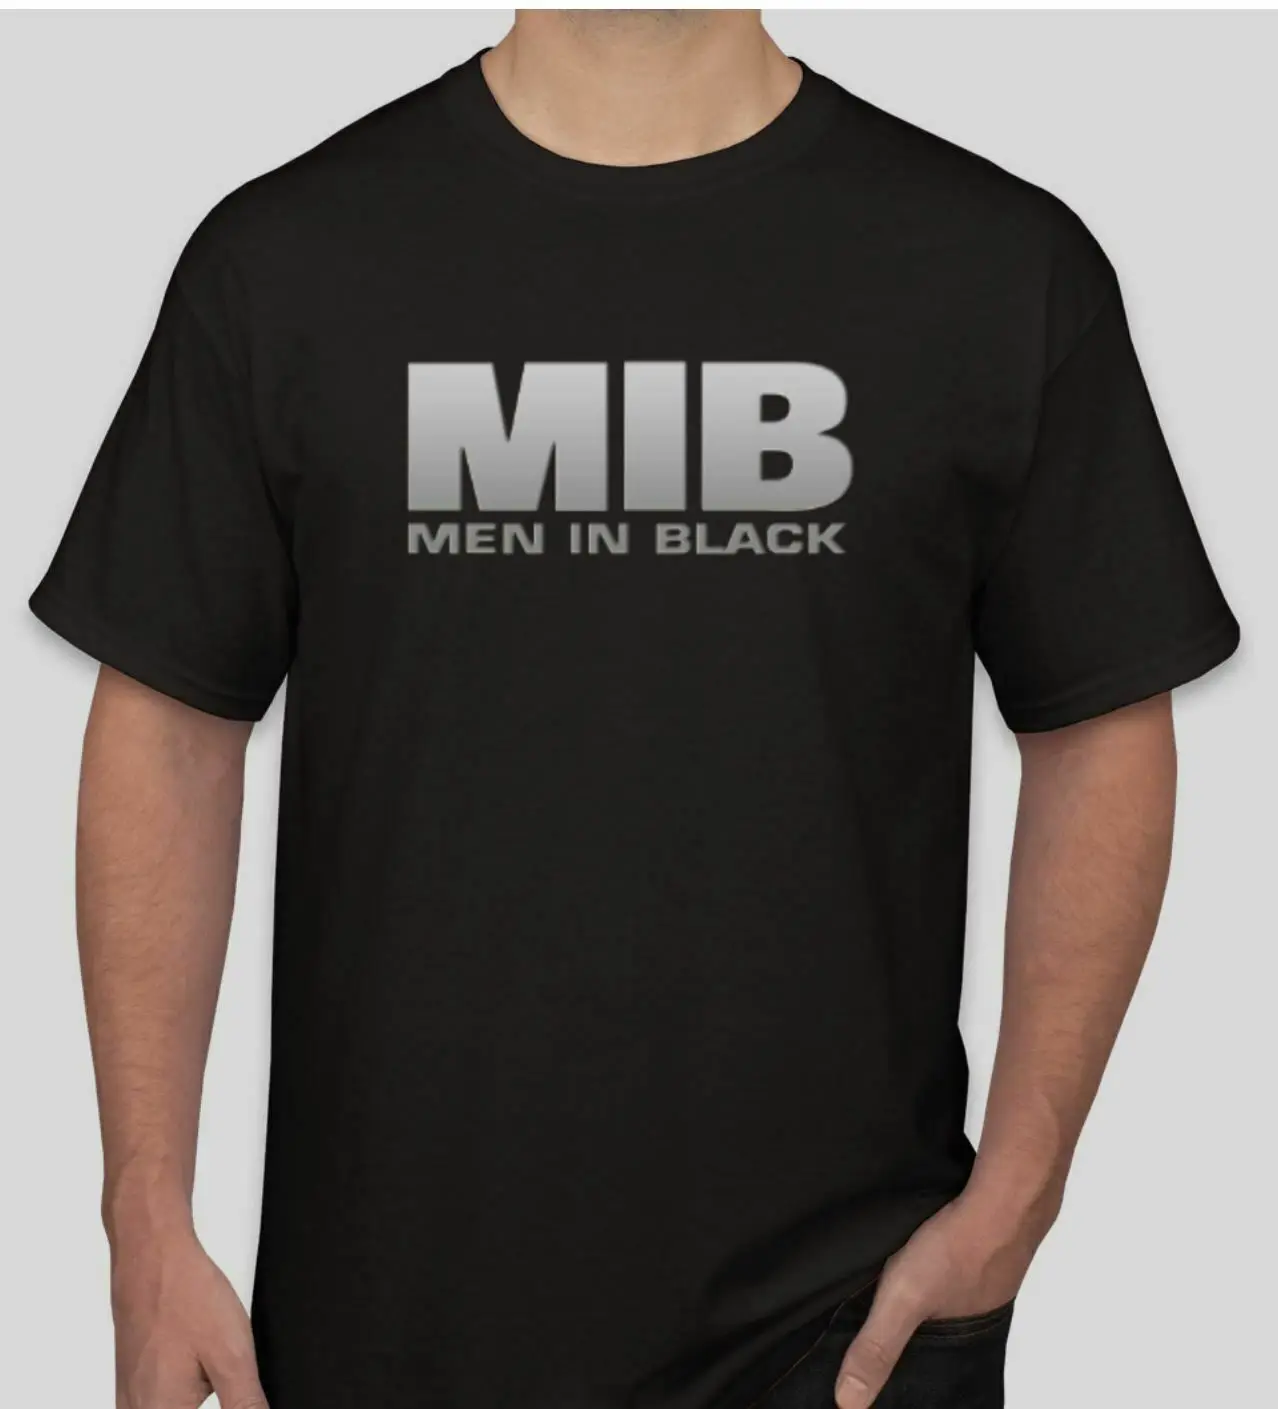 

Men In Black Adult Unisex MIB Logo Officially Licensed Adult T Shirt Authentic Summer Short Sleeves Cotton T-Shirt Fashion